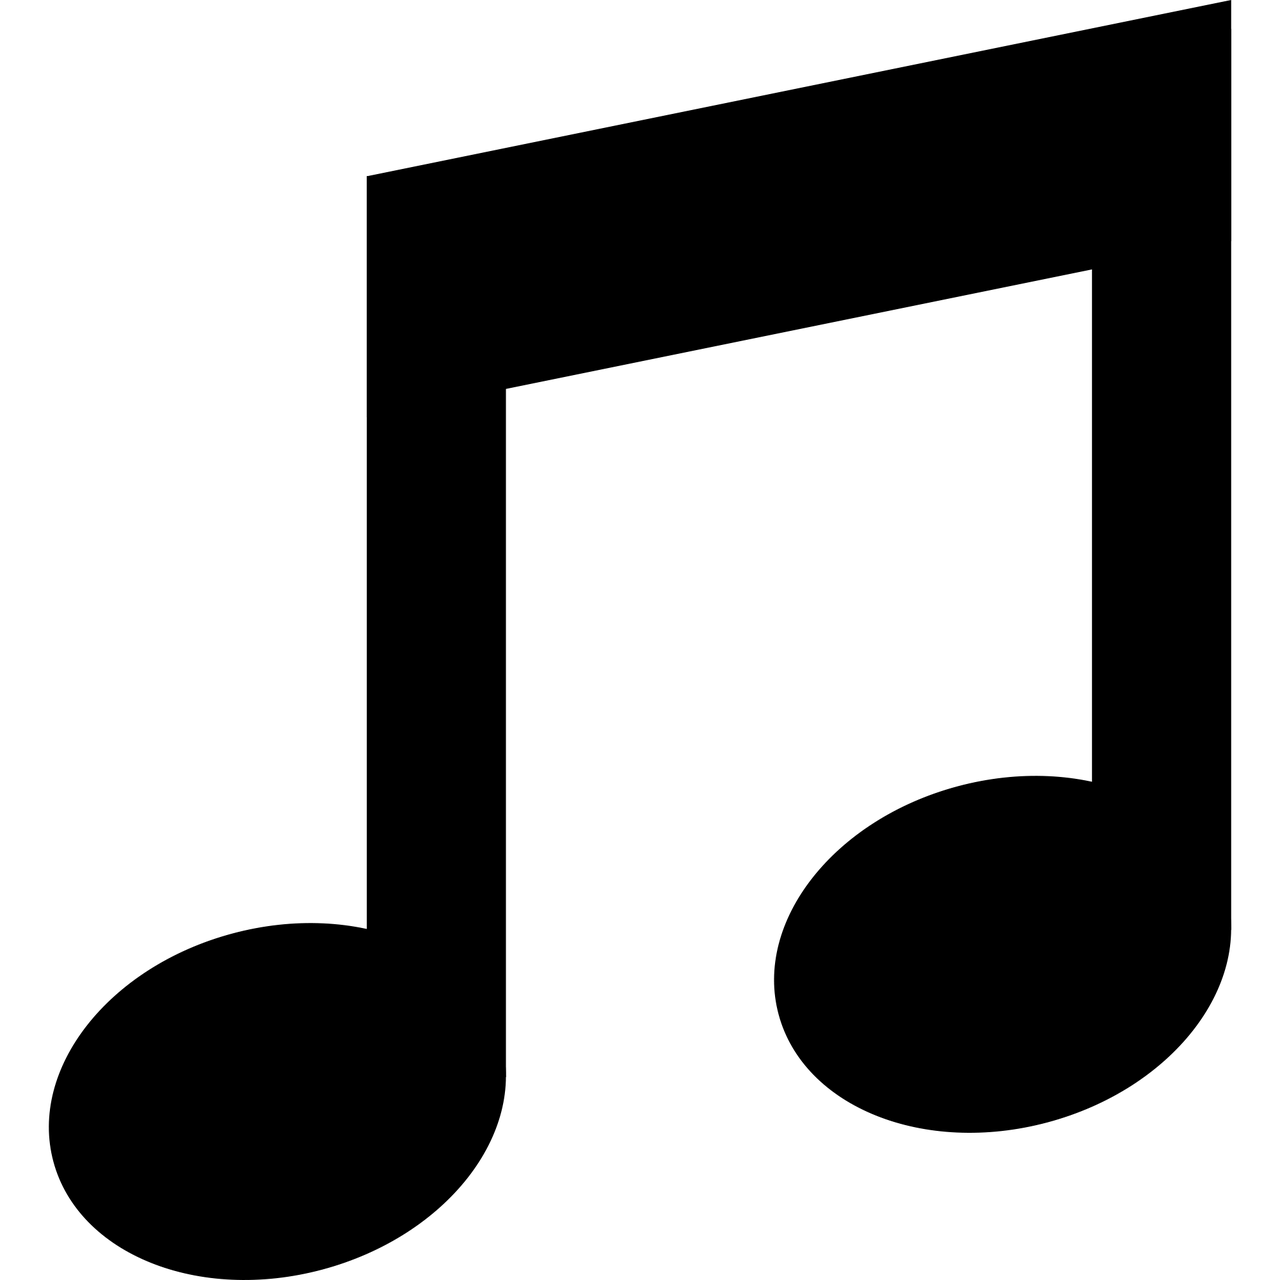 Music Symbols Png | Free download on ClipArtMag